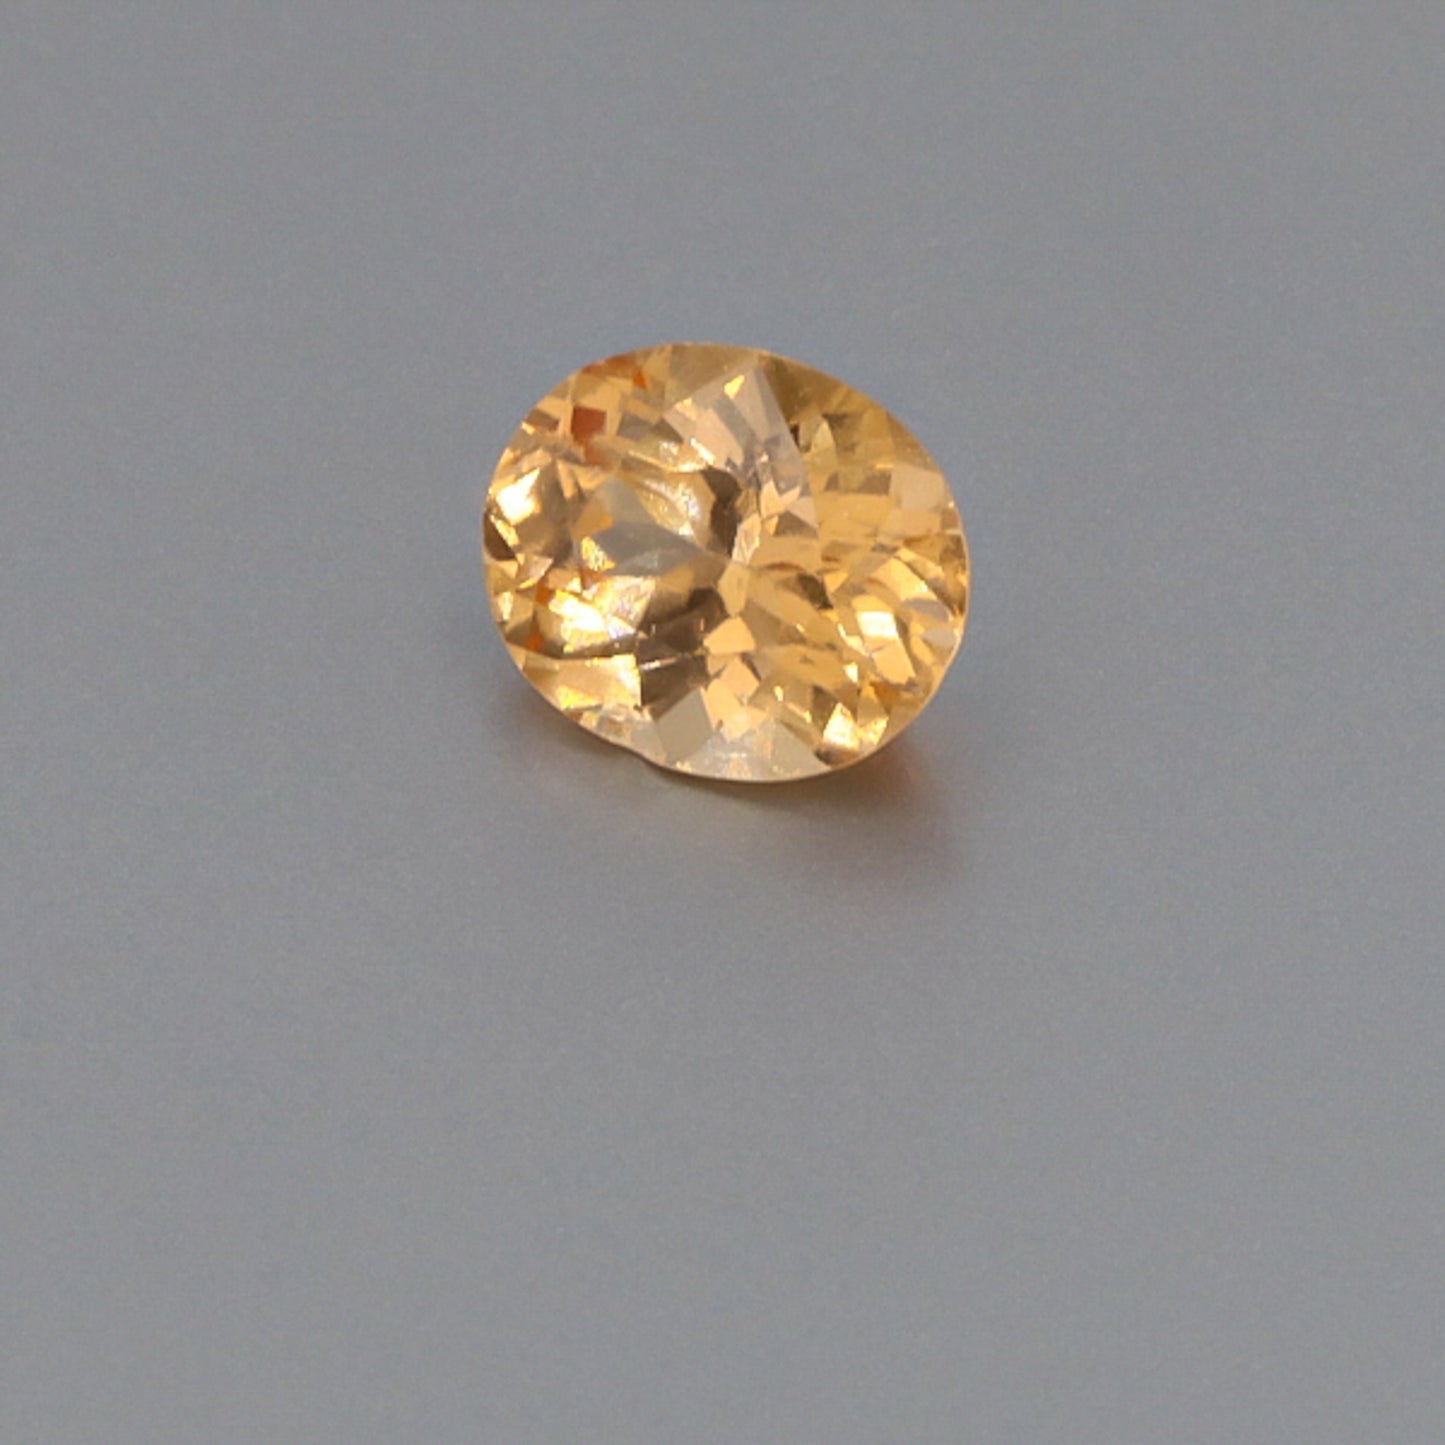 Load image into Gallery viewer, Natural Hessonite Garnet 3.65 Carats
